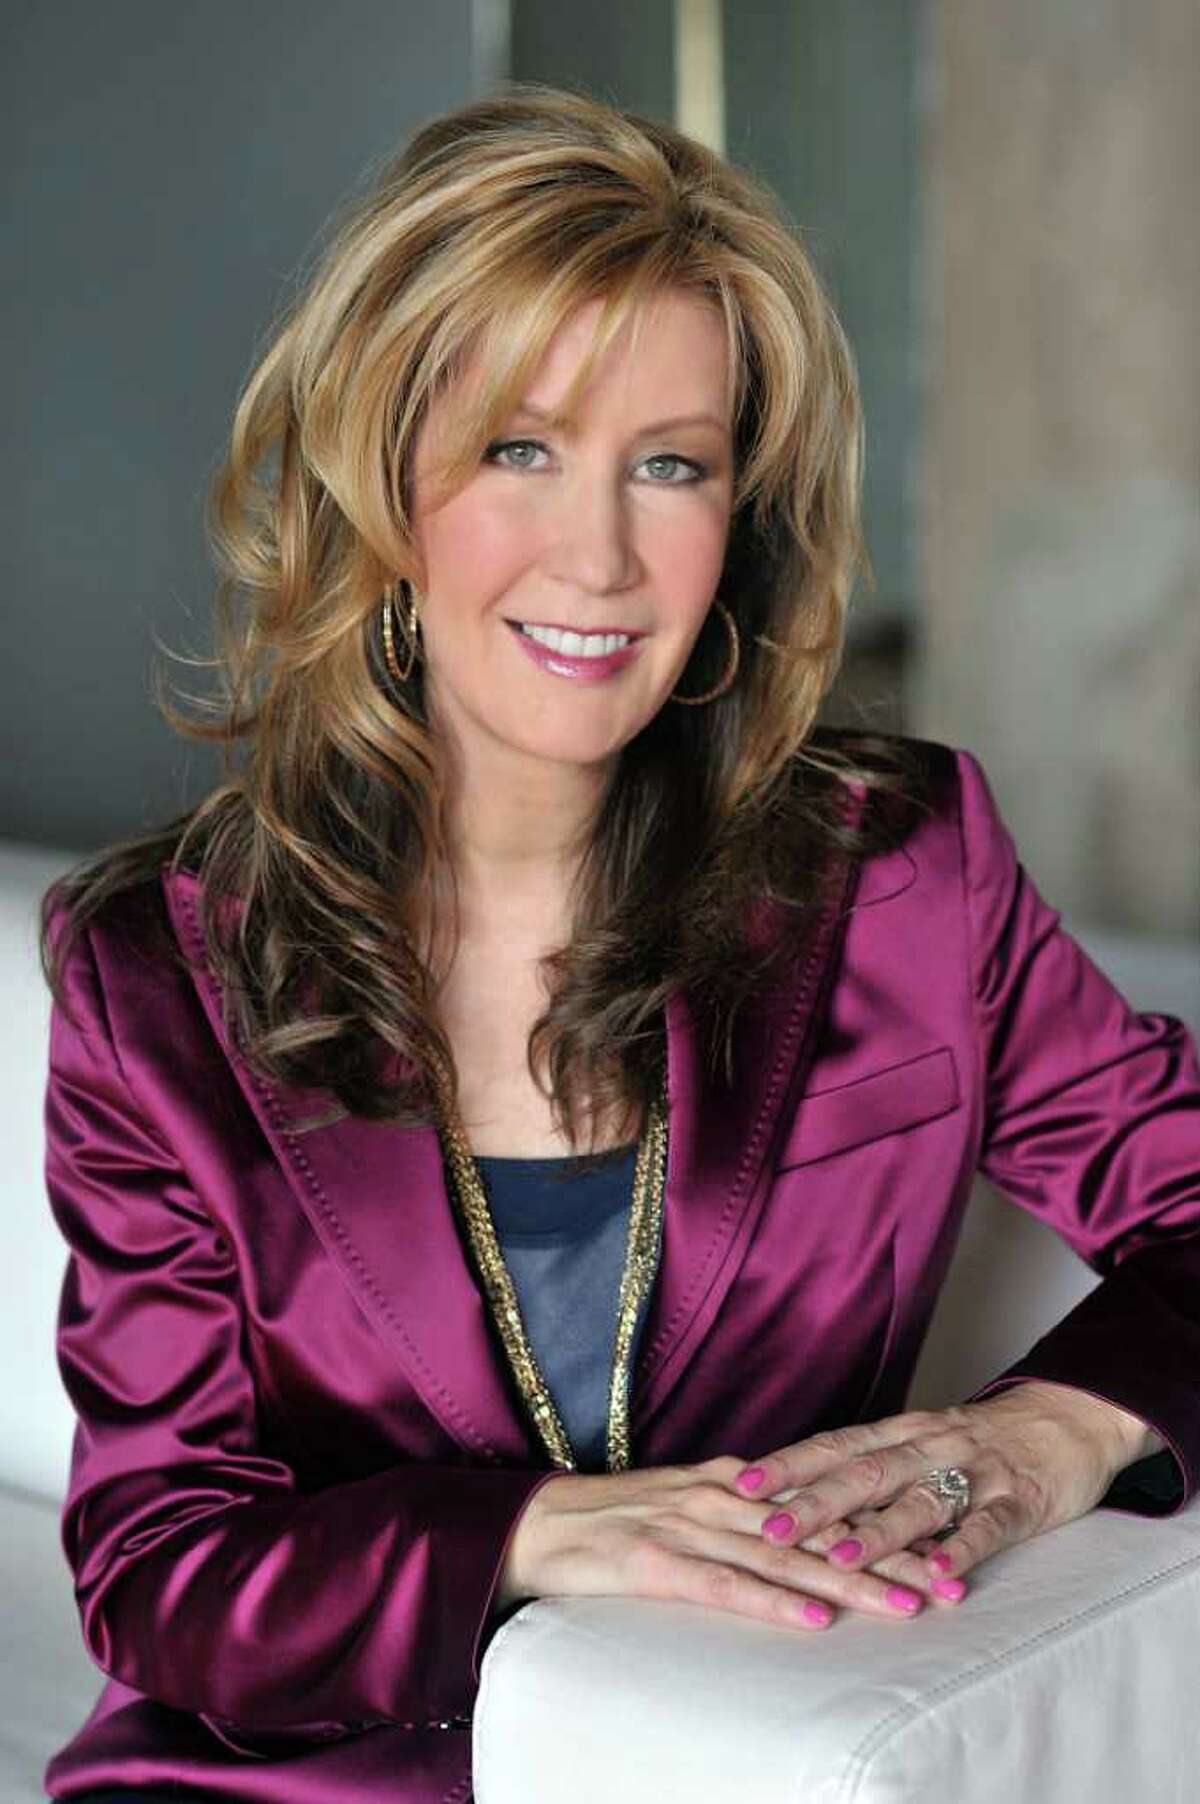 Lisa Osteen Comes, associate pastor of Lakewood Church, is the author of You Are Made for More!